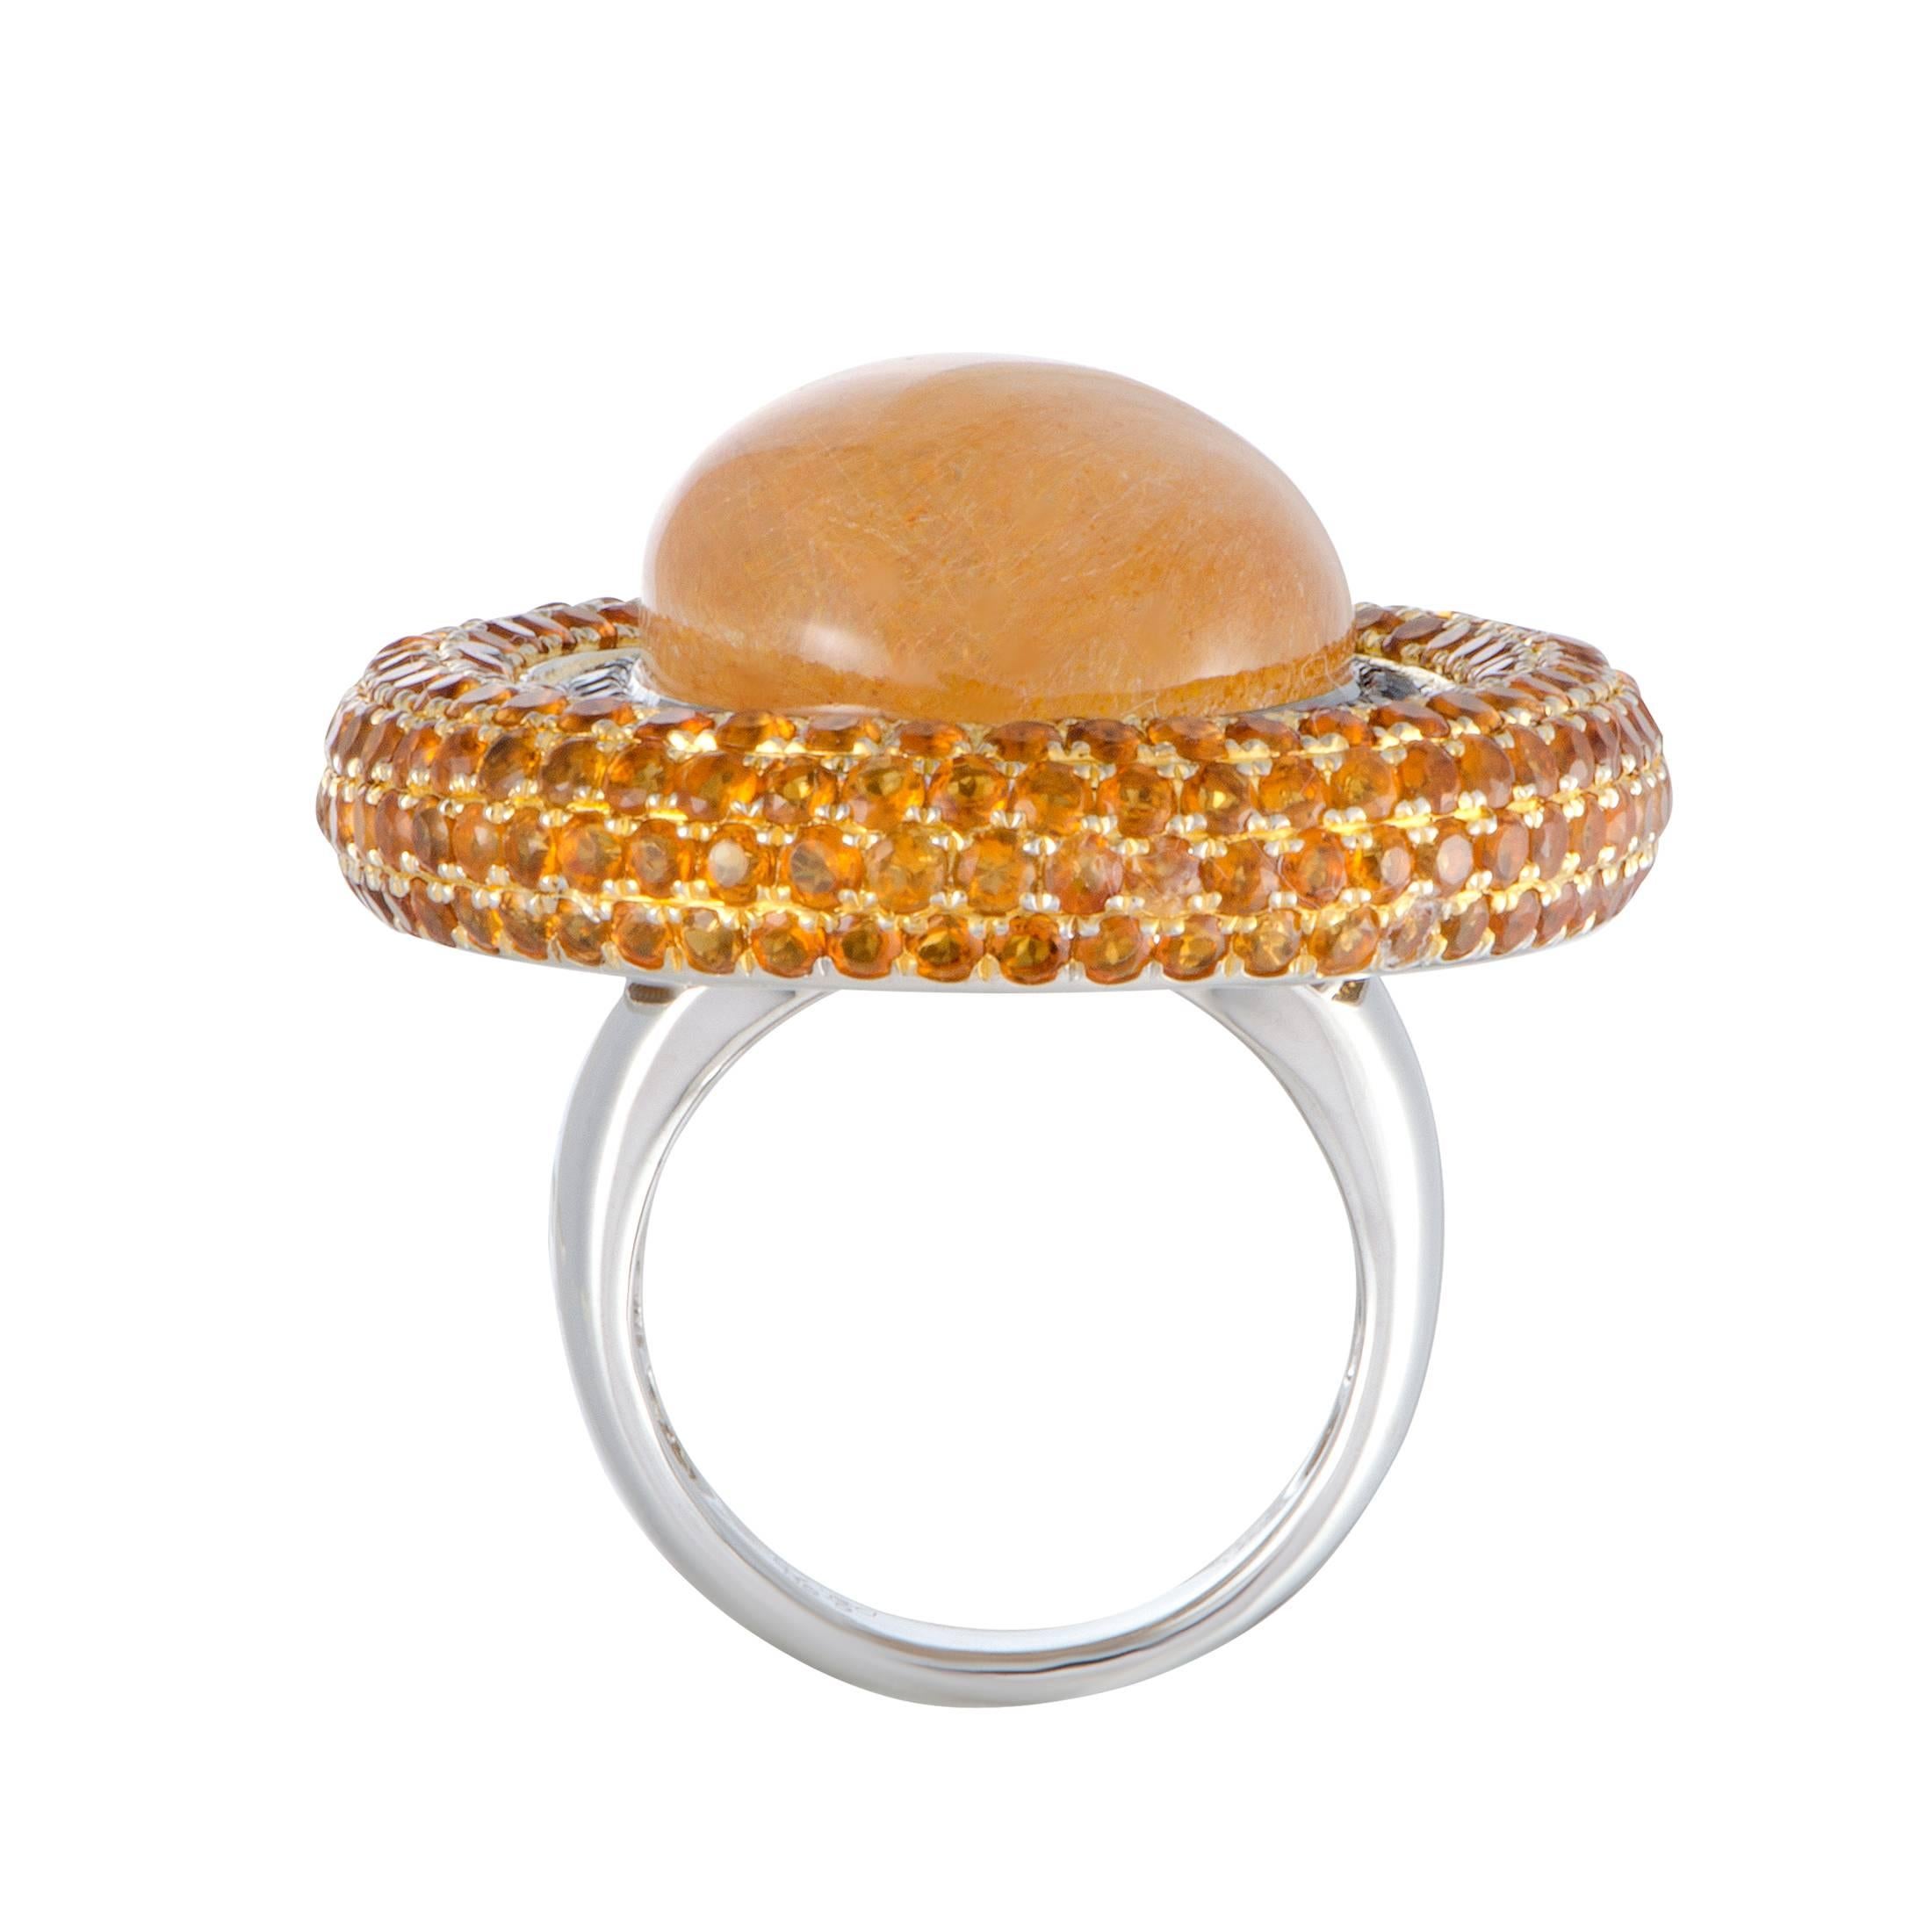 Slightly reminiscent of a stylish ladies’ hat, this fashionable ring endears with its extraordinary design and spellbinding décor. Made of 18K white gold, the ring is set with rutilated yellow quartz, 6.60 carats of citrines, and 0.75 carats of